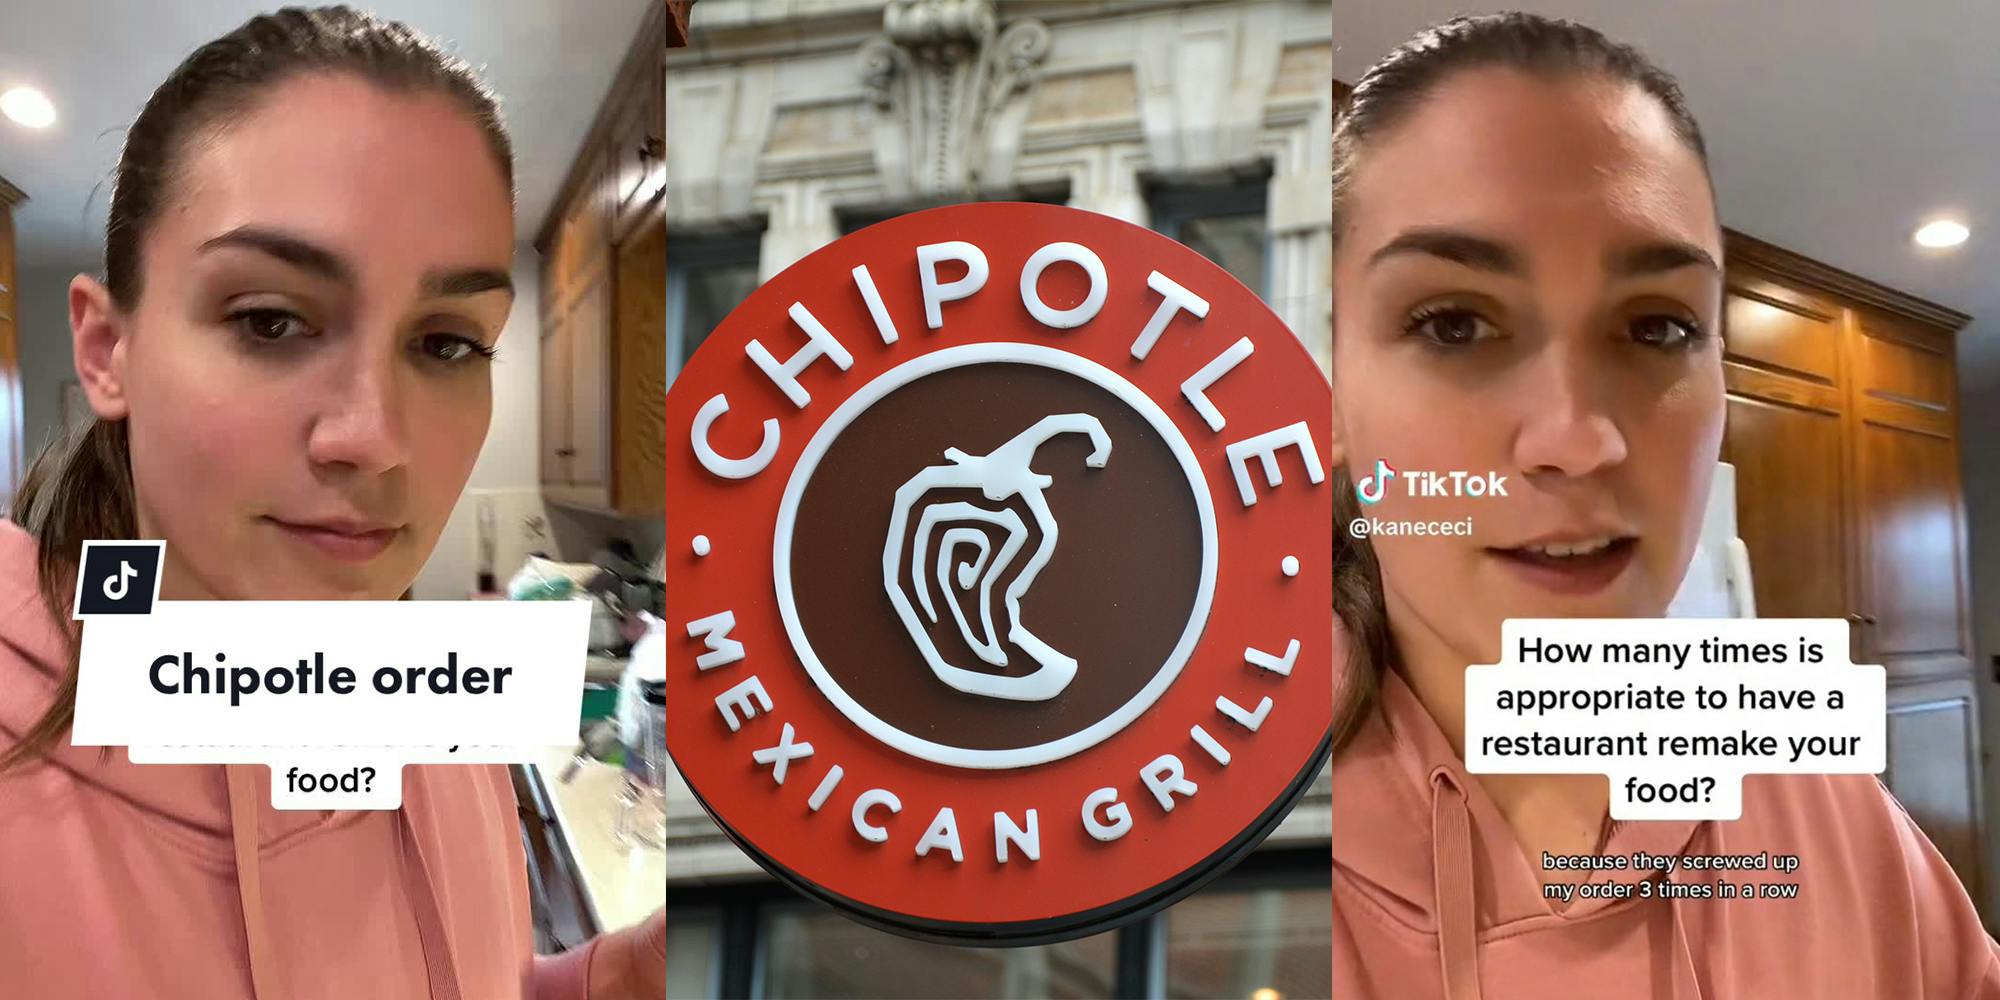 Customer says she had to cook Chipotle quesadilla at home after workers messed up her order 3 times